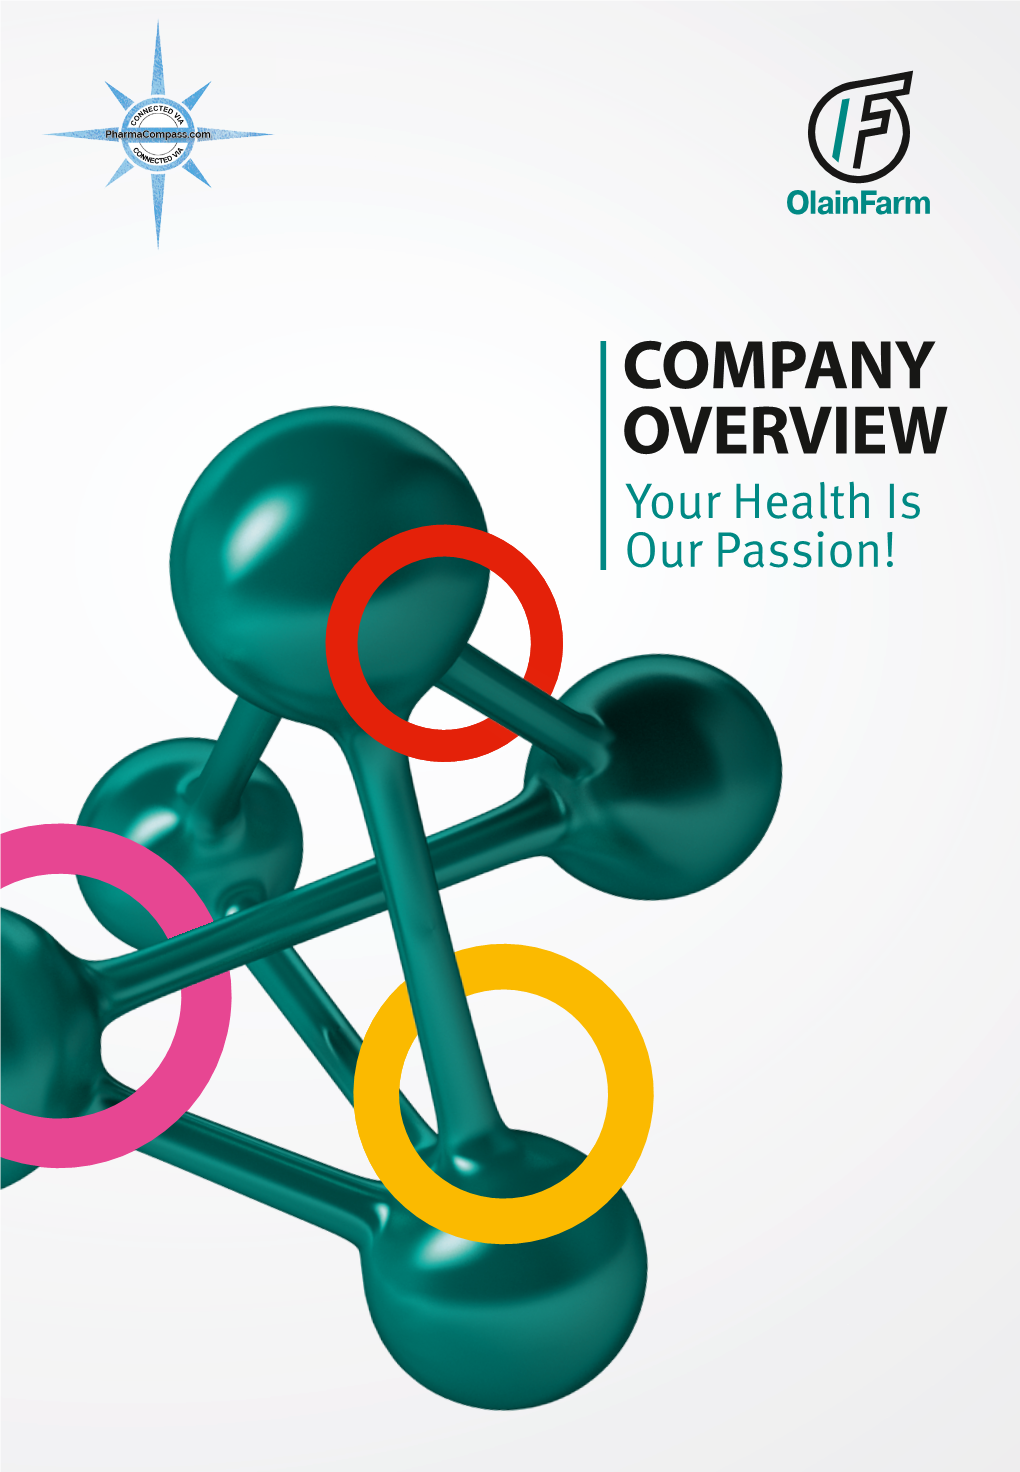 COMPANY OVERVIEW Your Health Is Our Passion! Olainfarm